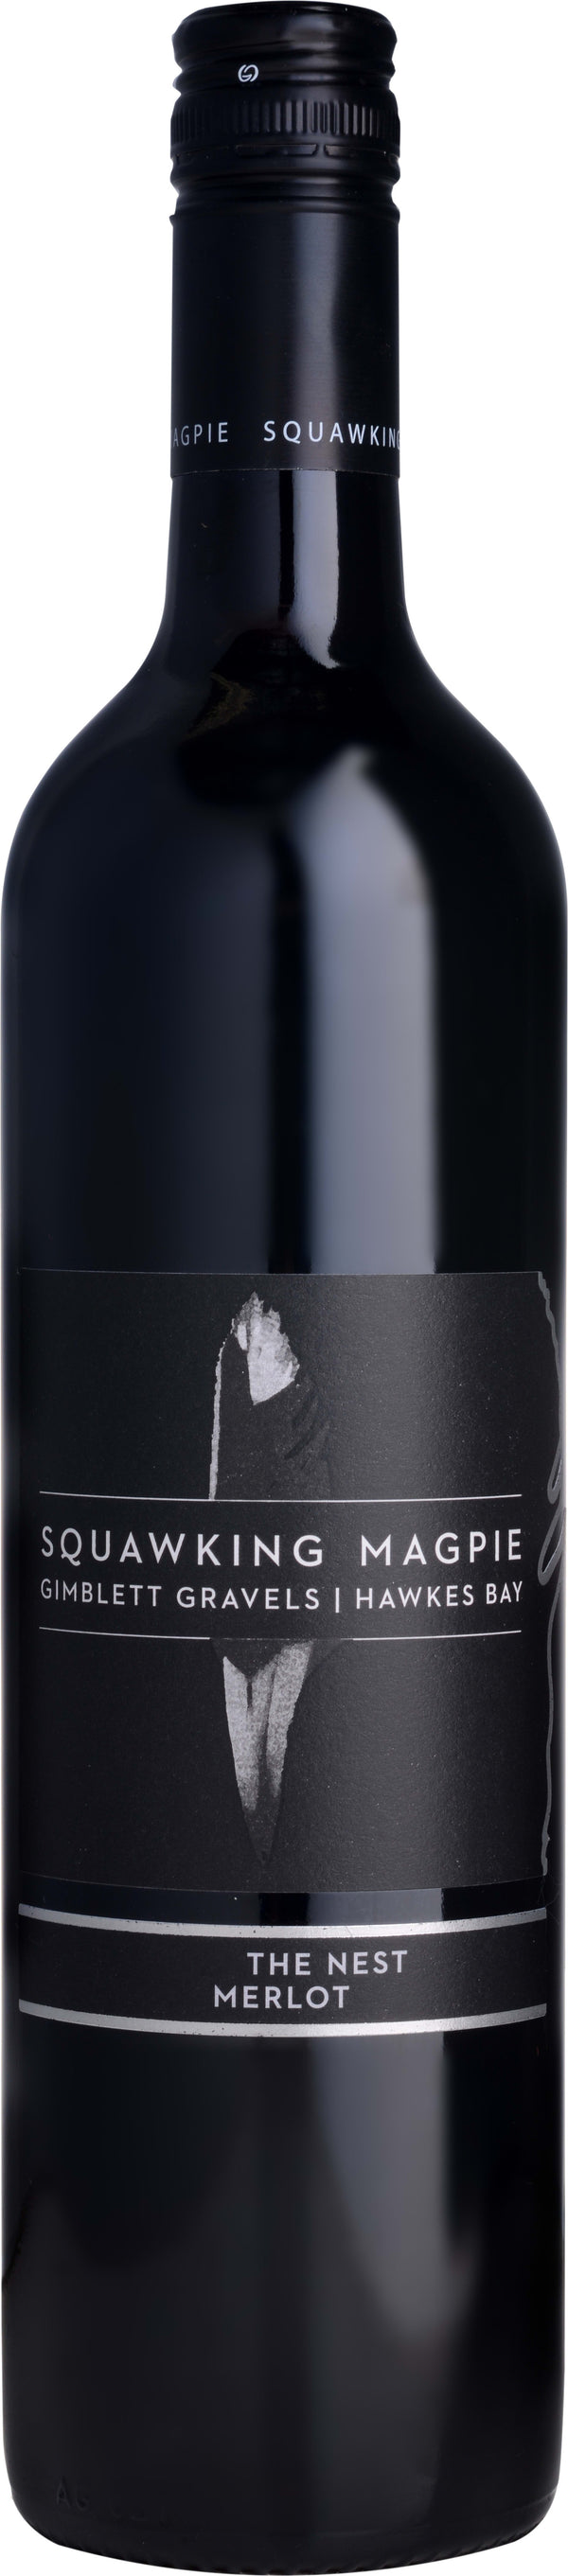 Squawking Magpie The Nest Merlot 2015 6x75cl - Just Wines 